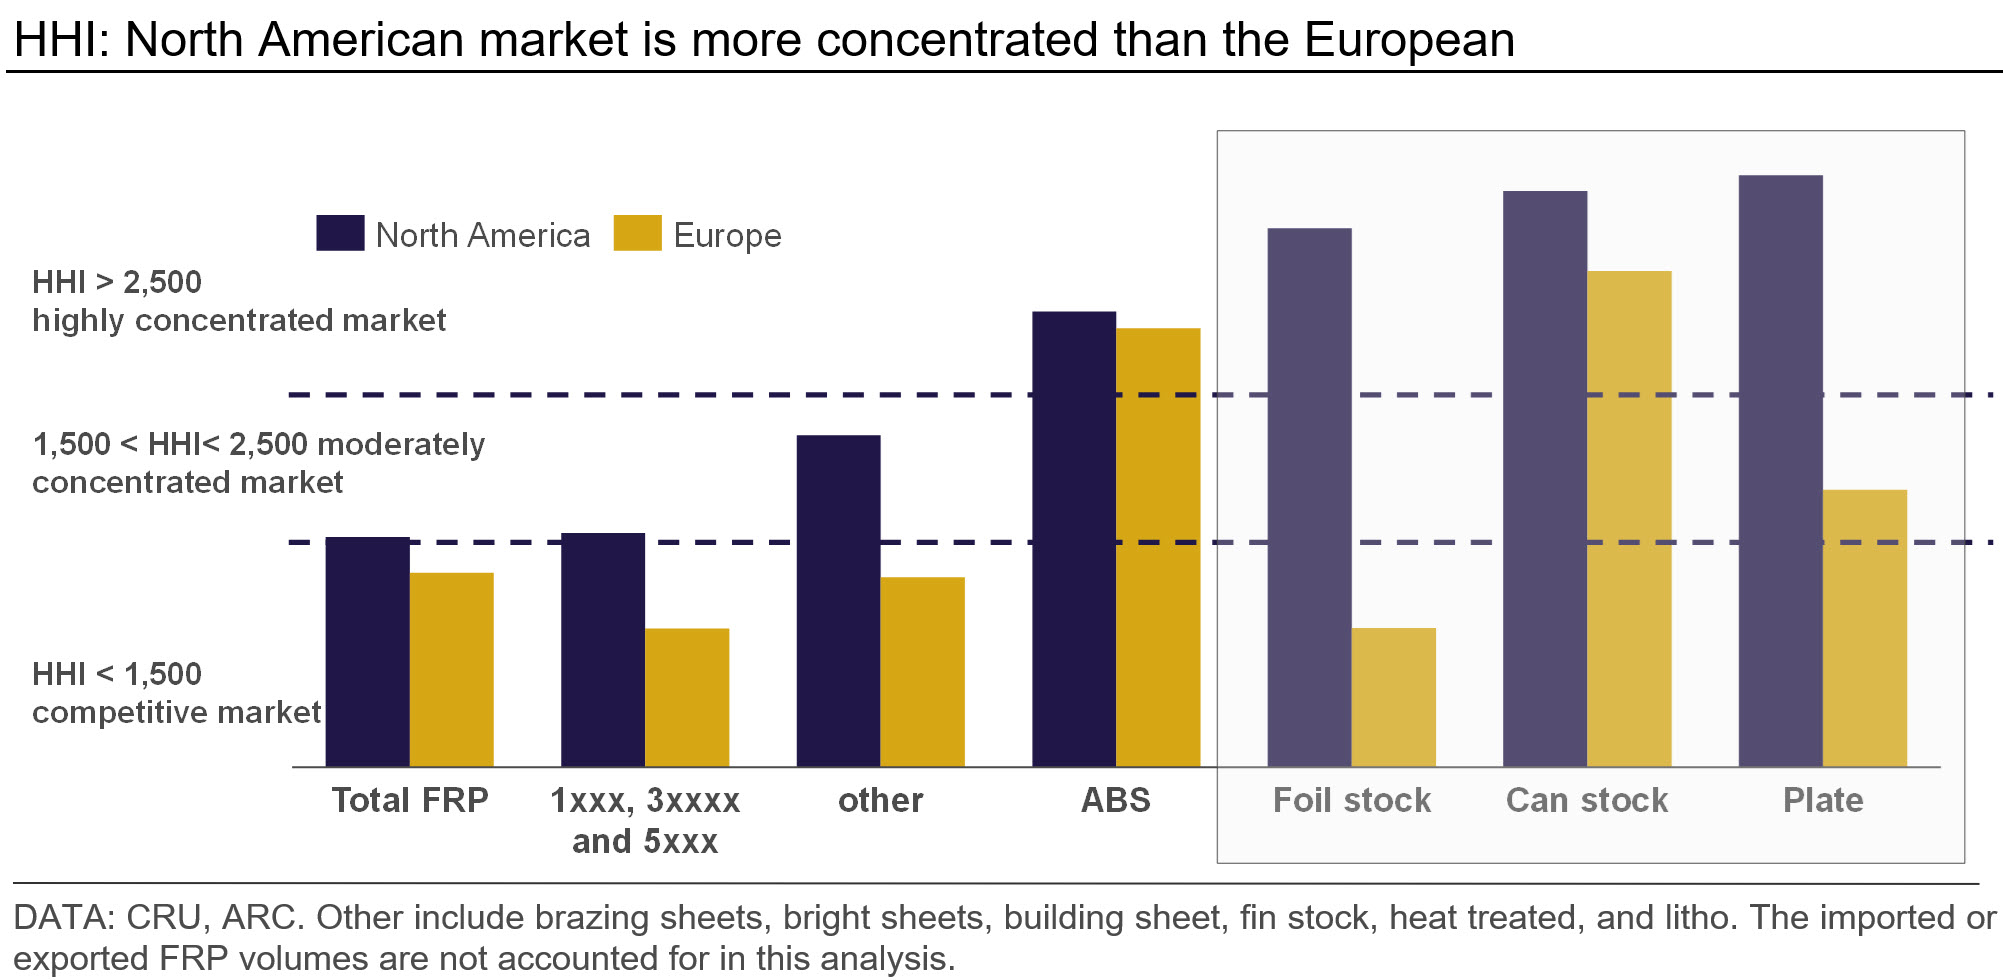 A graph showing that the North American market is more concentrated than the European market.